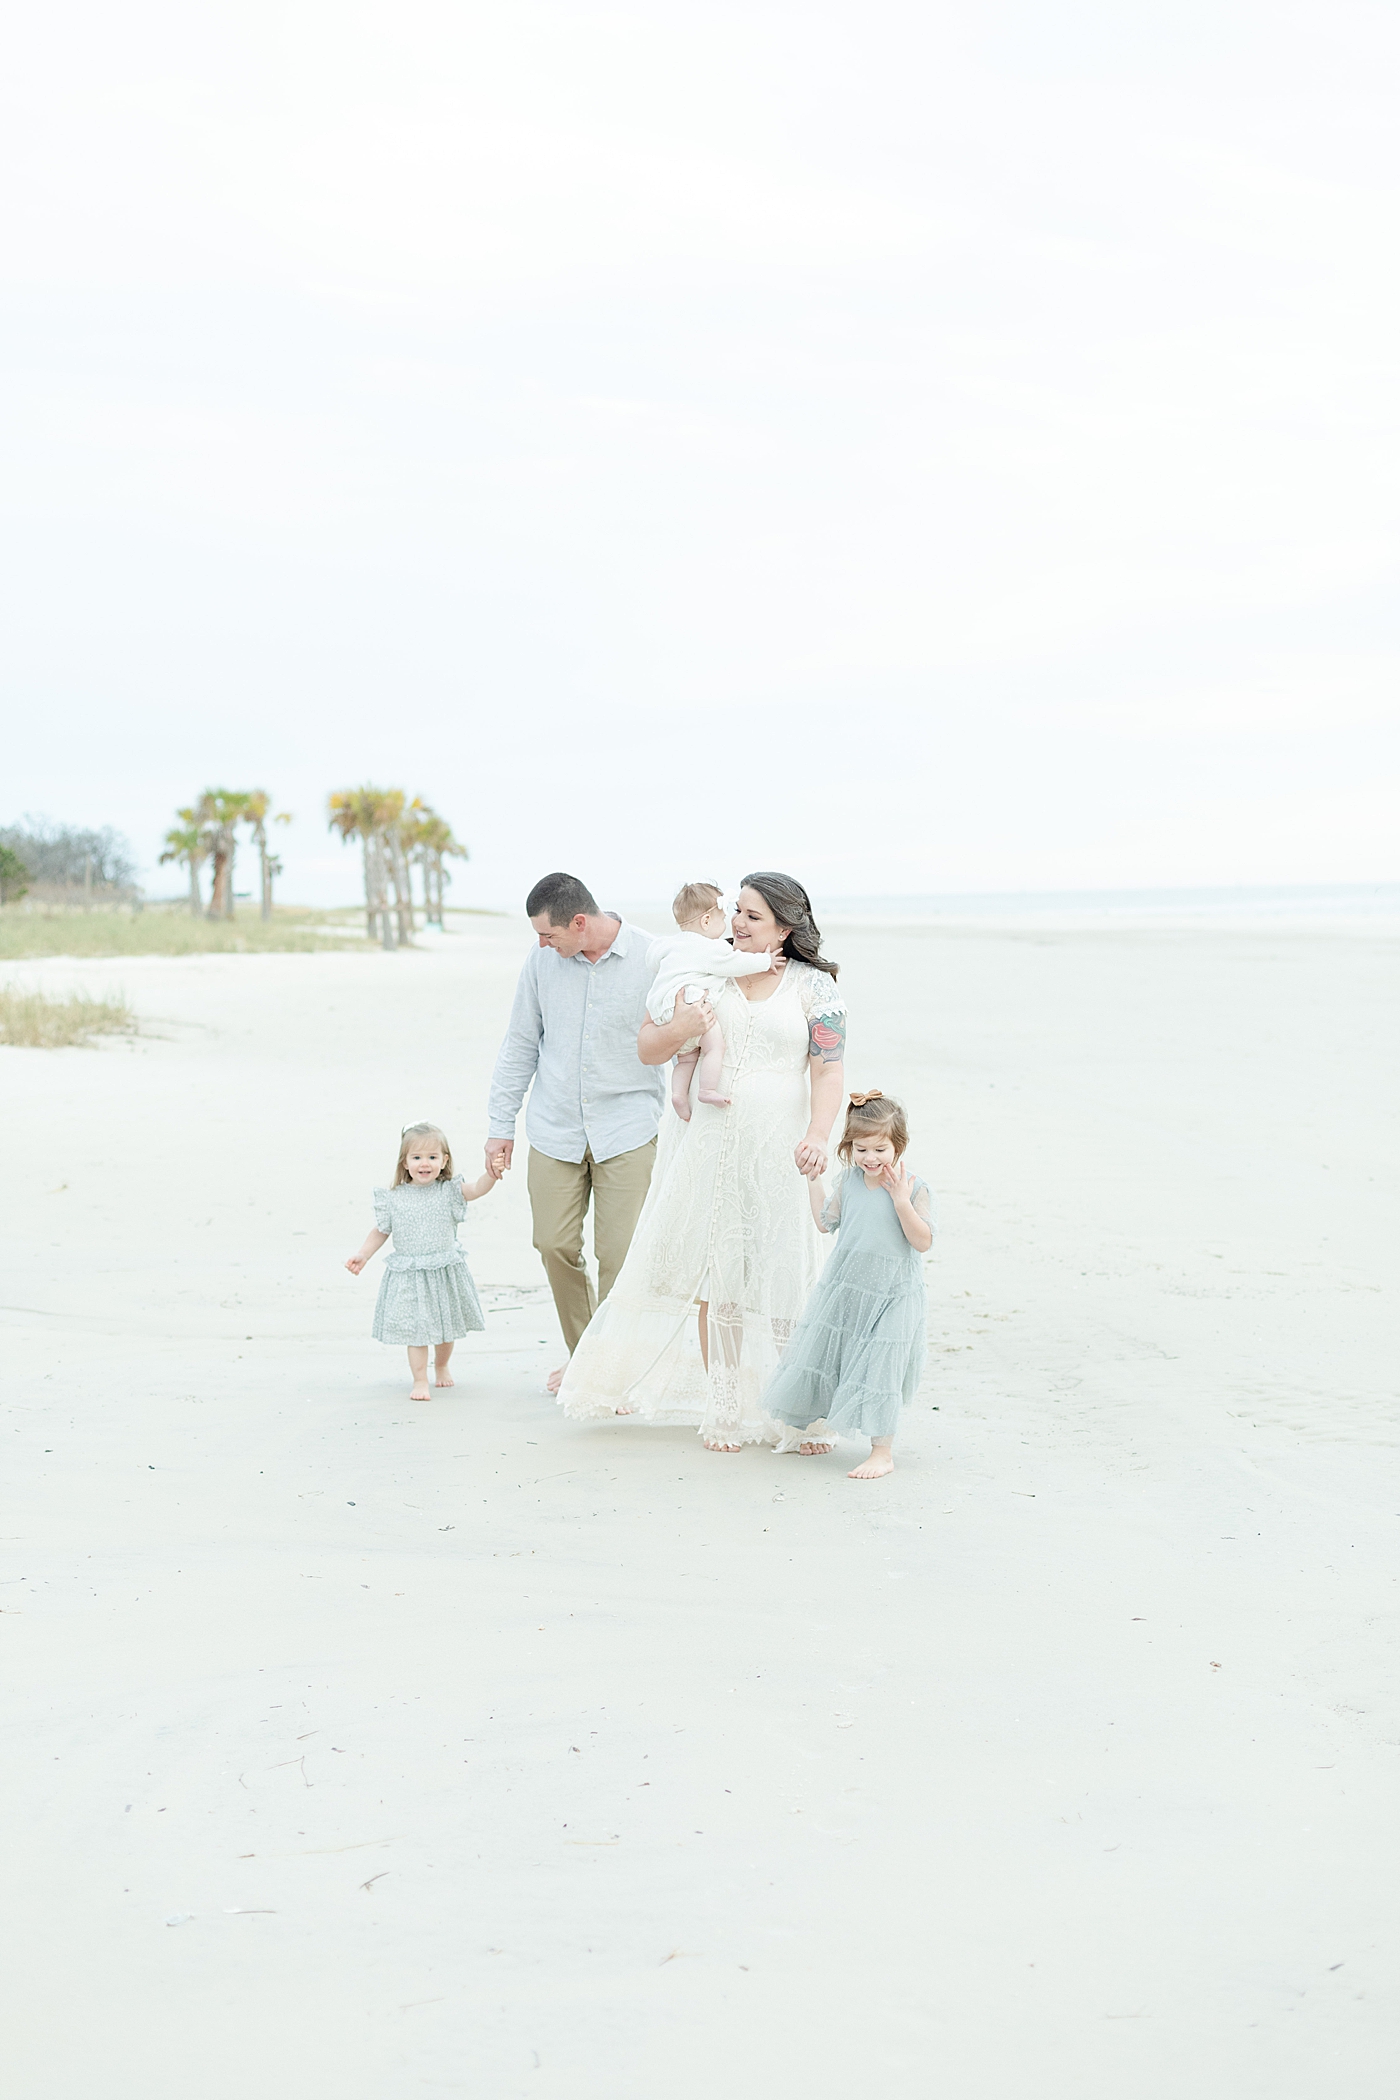 Family walking on the beach | Photo by Little Sunshine Photography